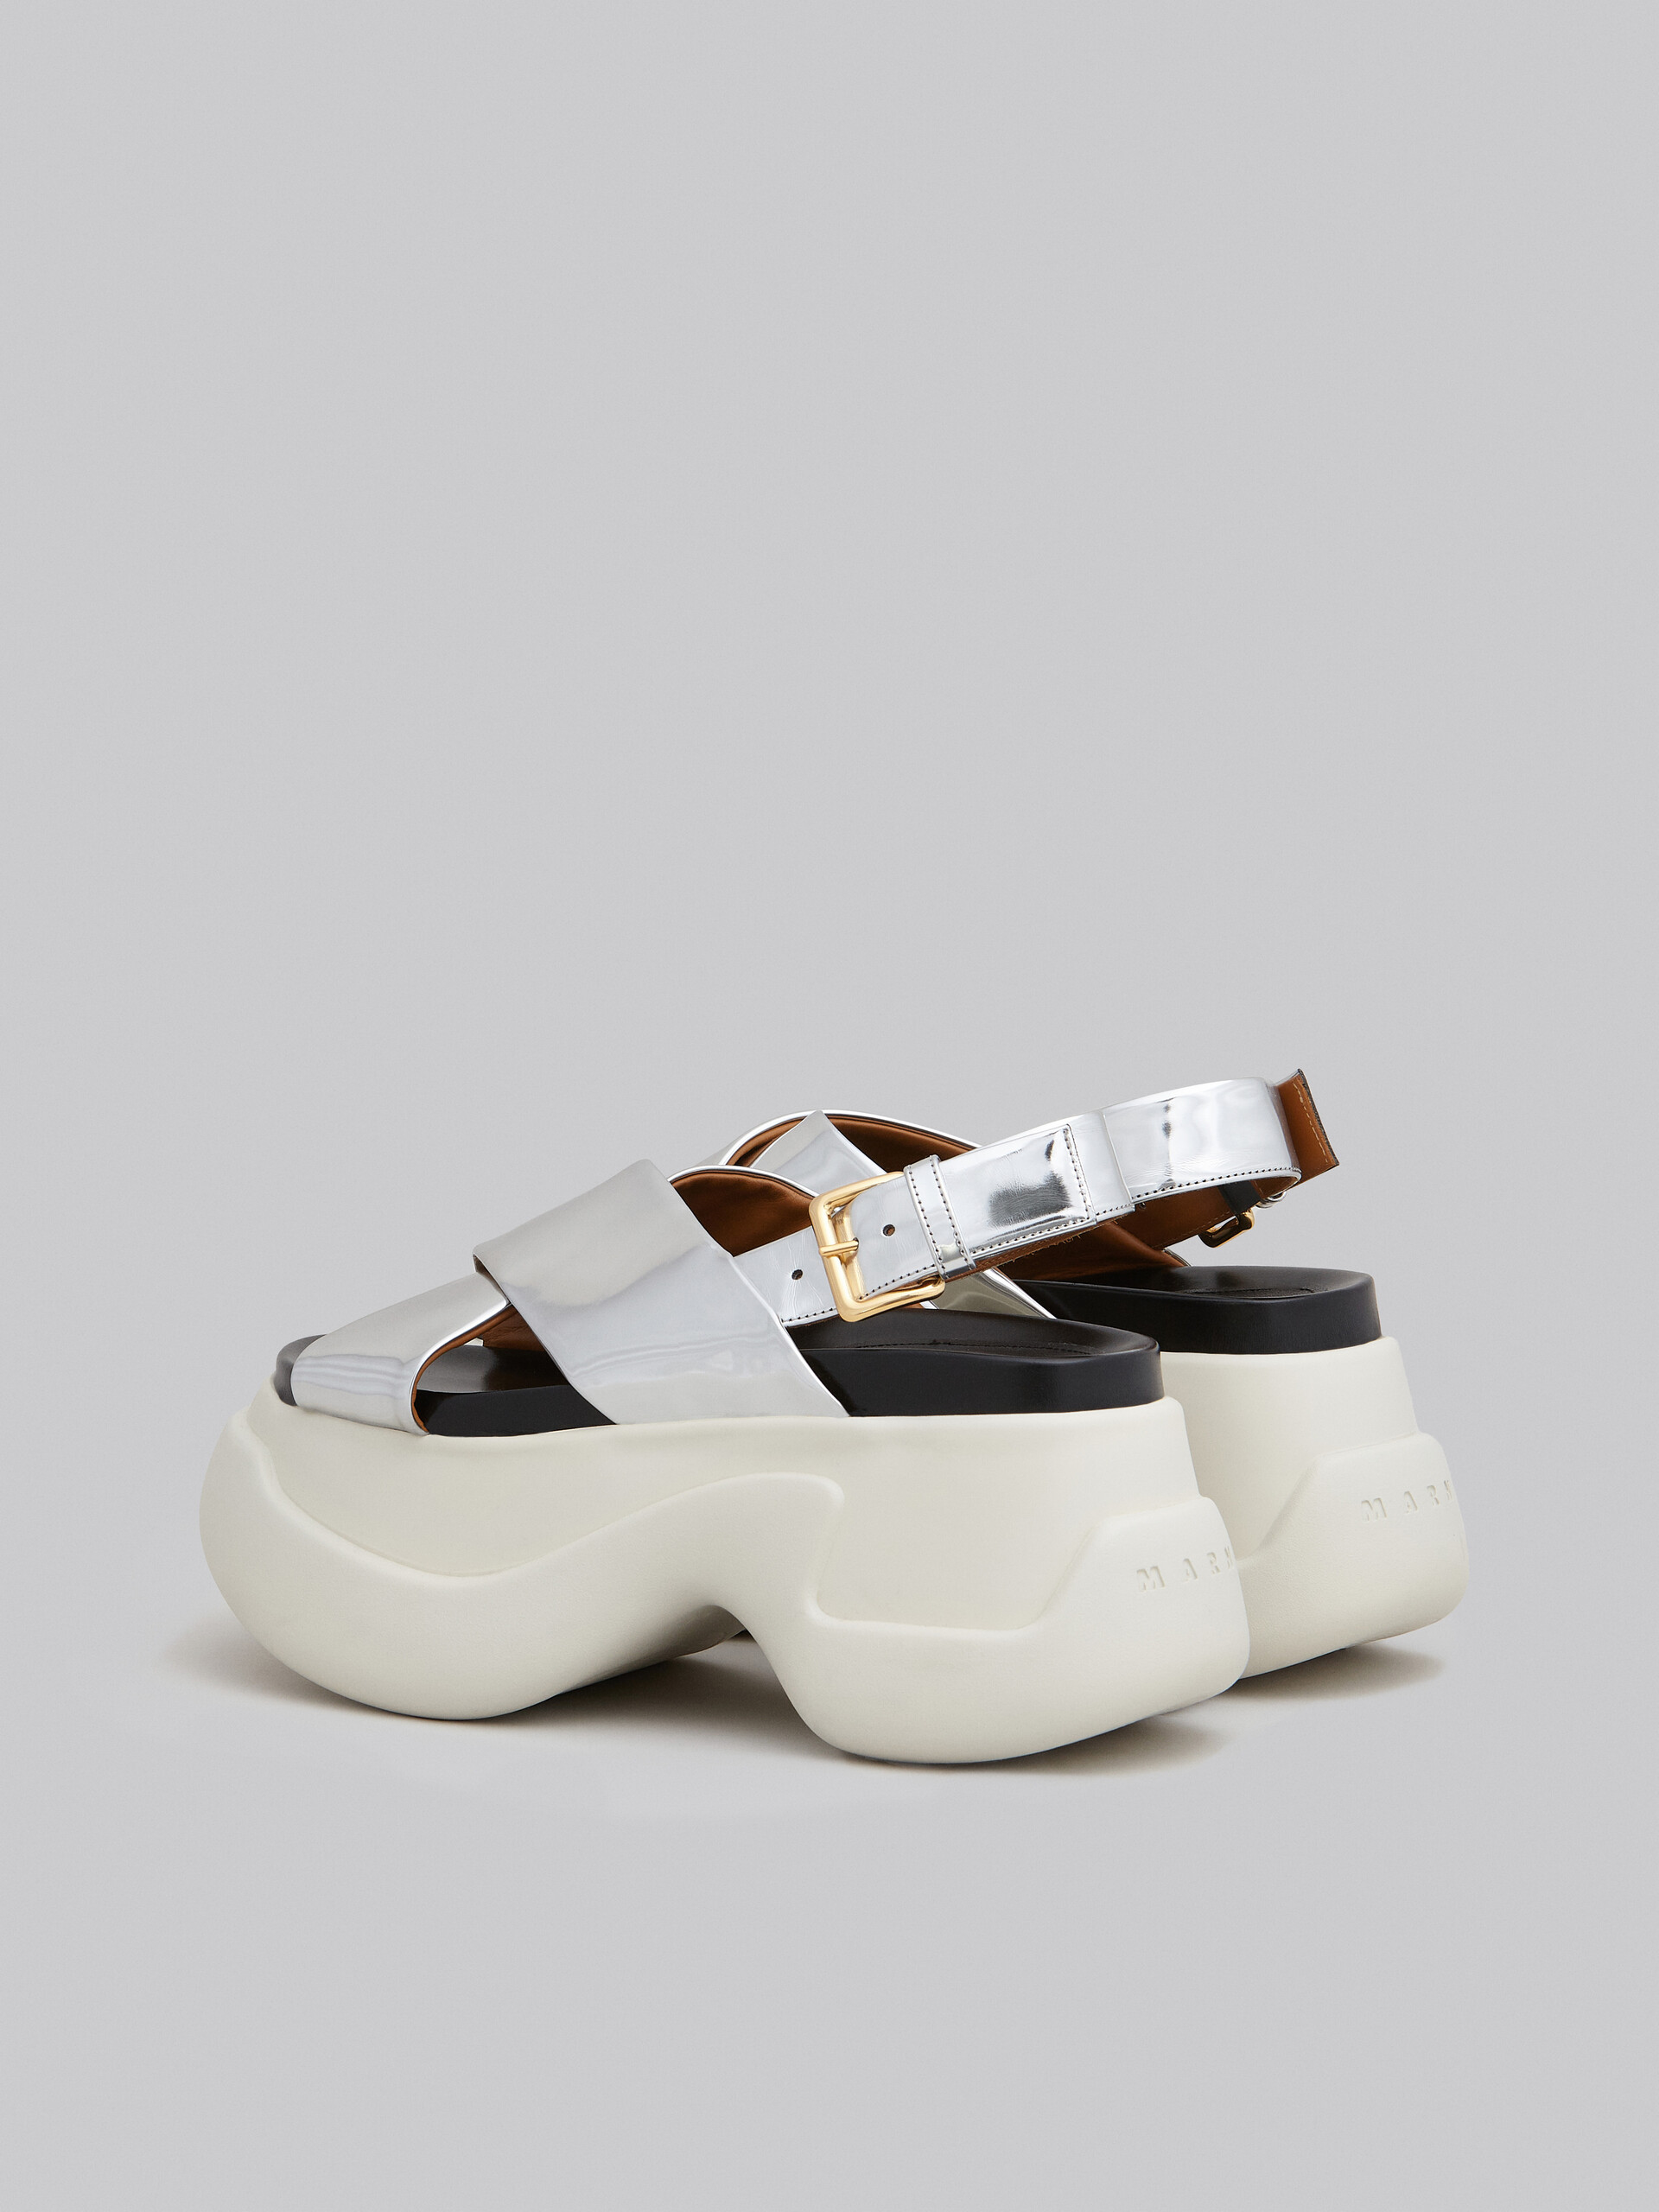 Silver mirrored leather Fussbett - Sandals - Image 3